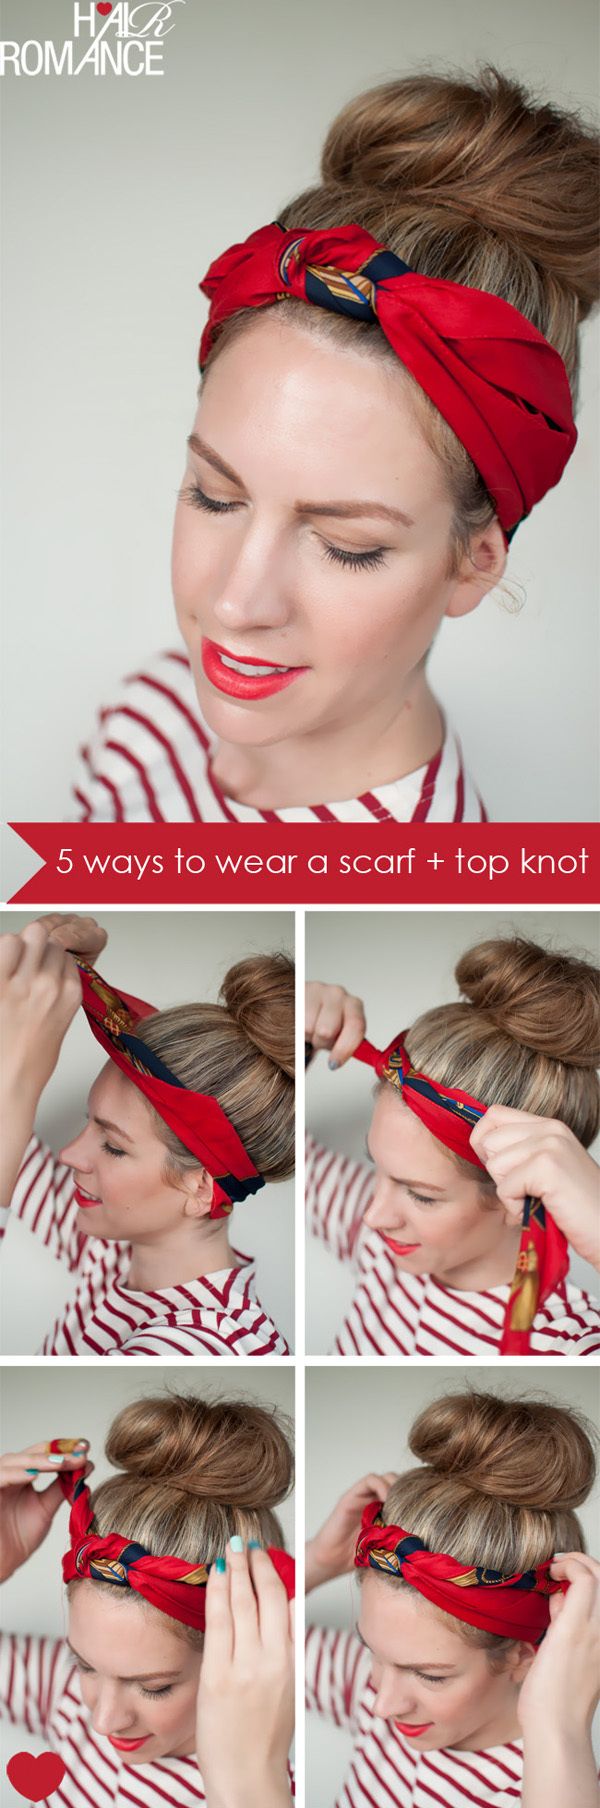 https://image.sistacafe.com/images/uploads/content_image/image/159698/1468253313-5-ways-scarf-top-knot-hairstyle-headband-tutorial.jpg